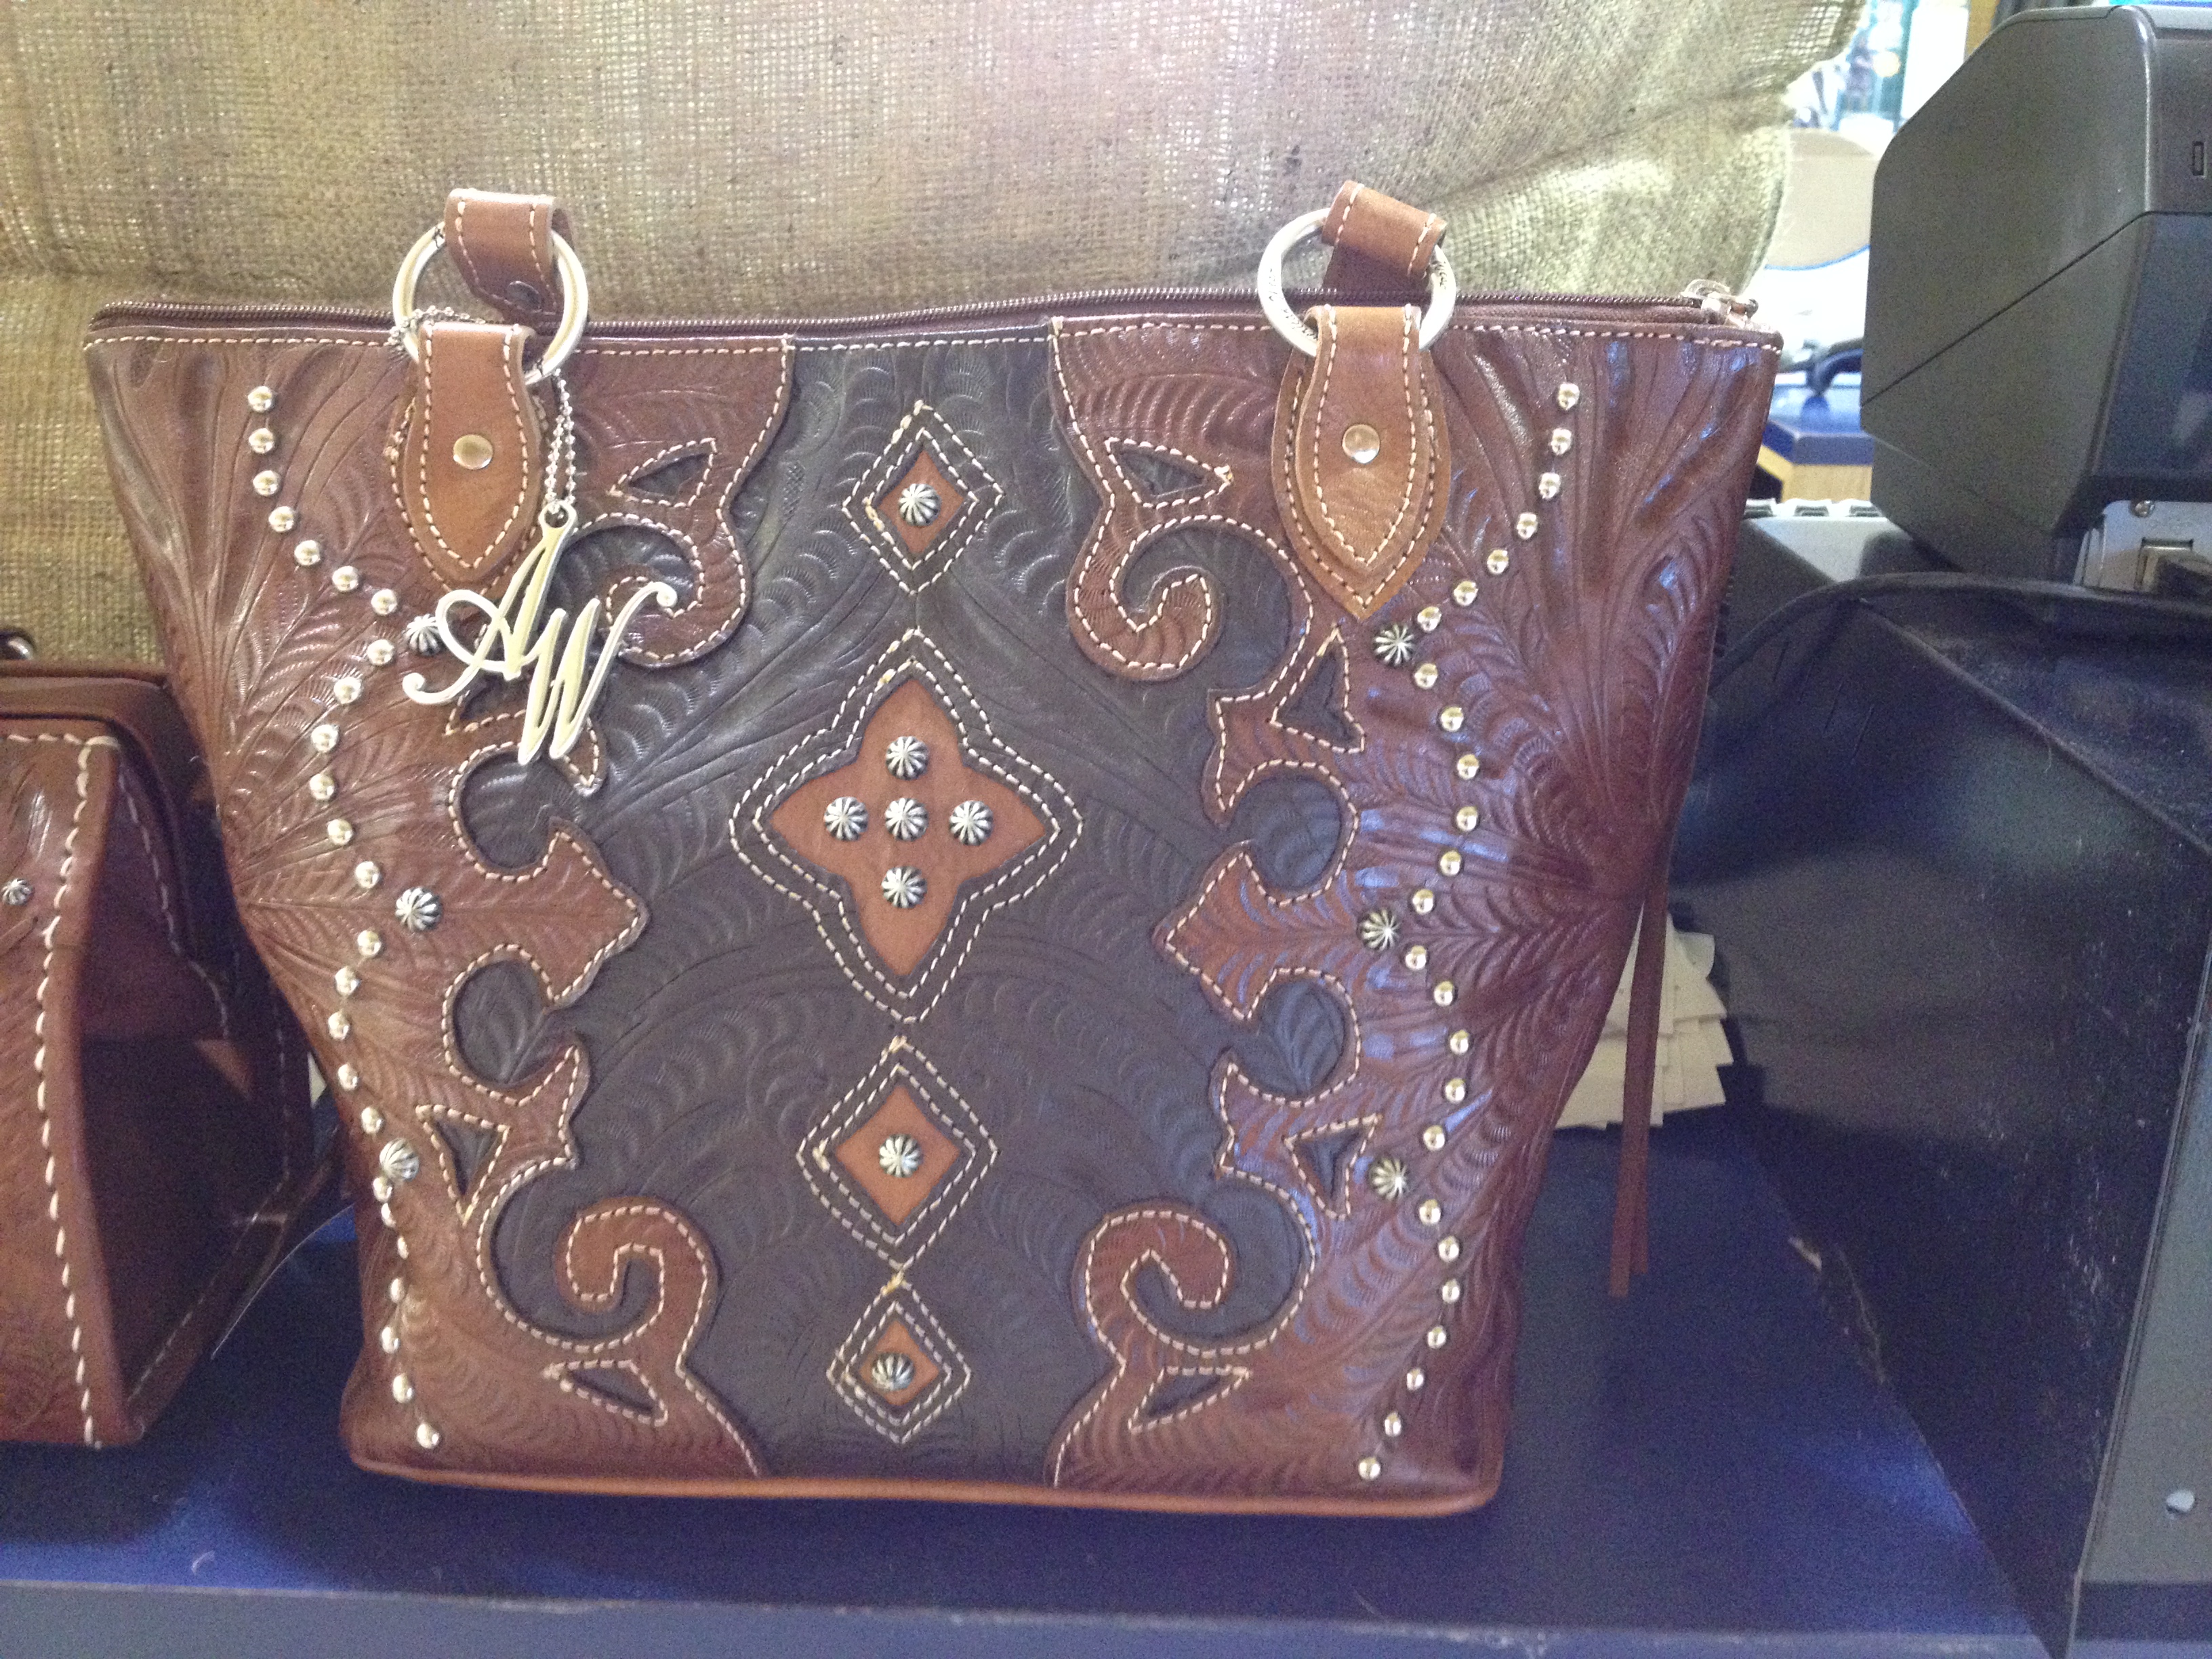 40% Off American West Leather Purses :: New Braunfels Feed & Supply